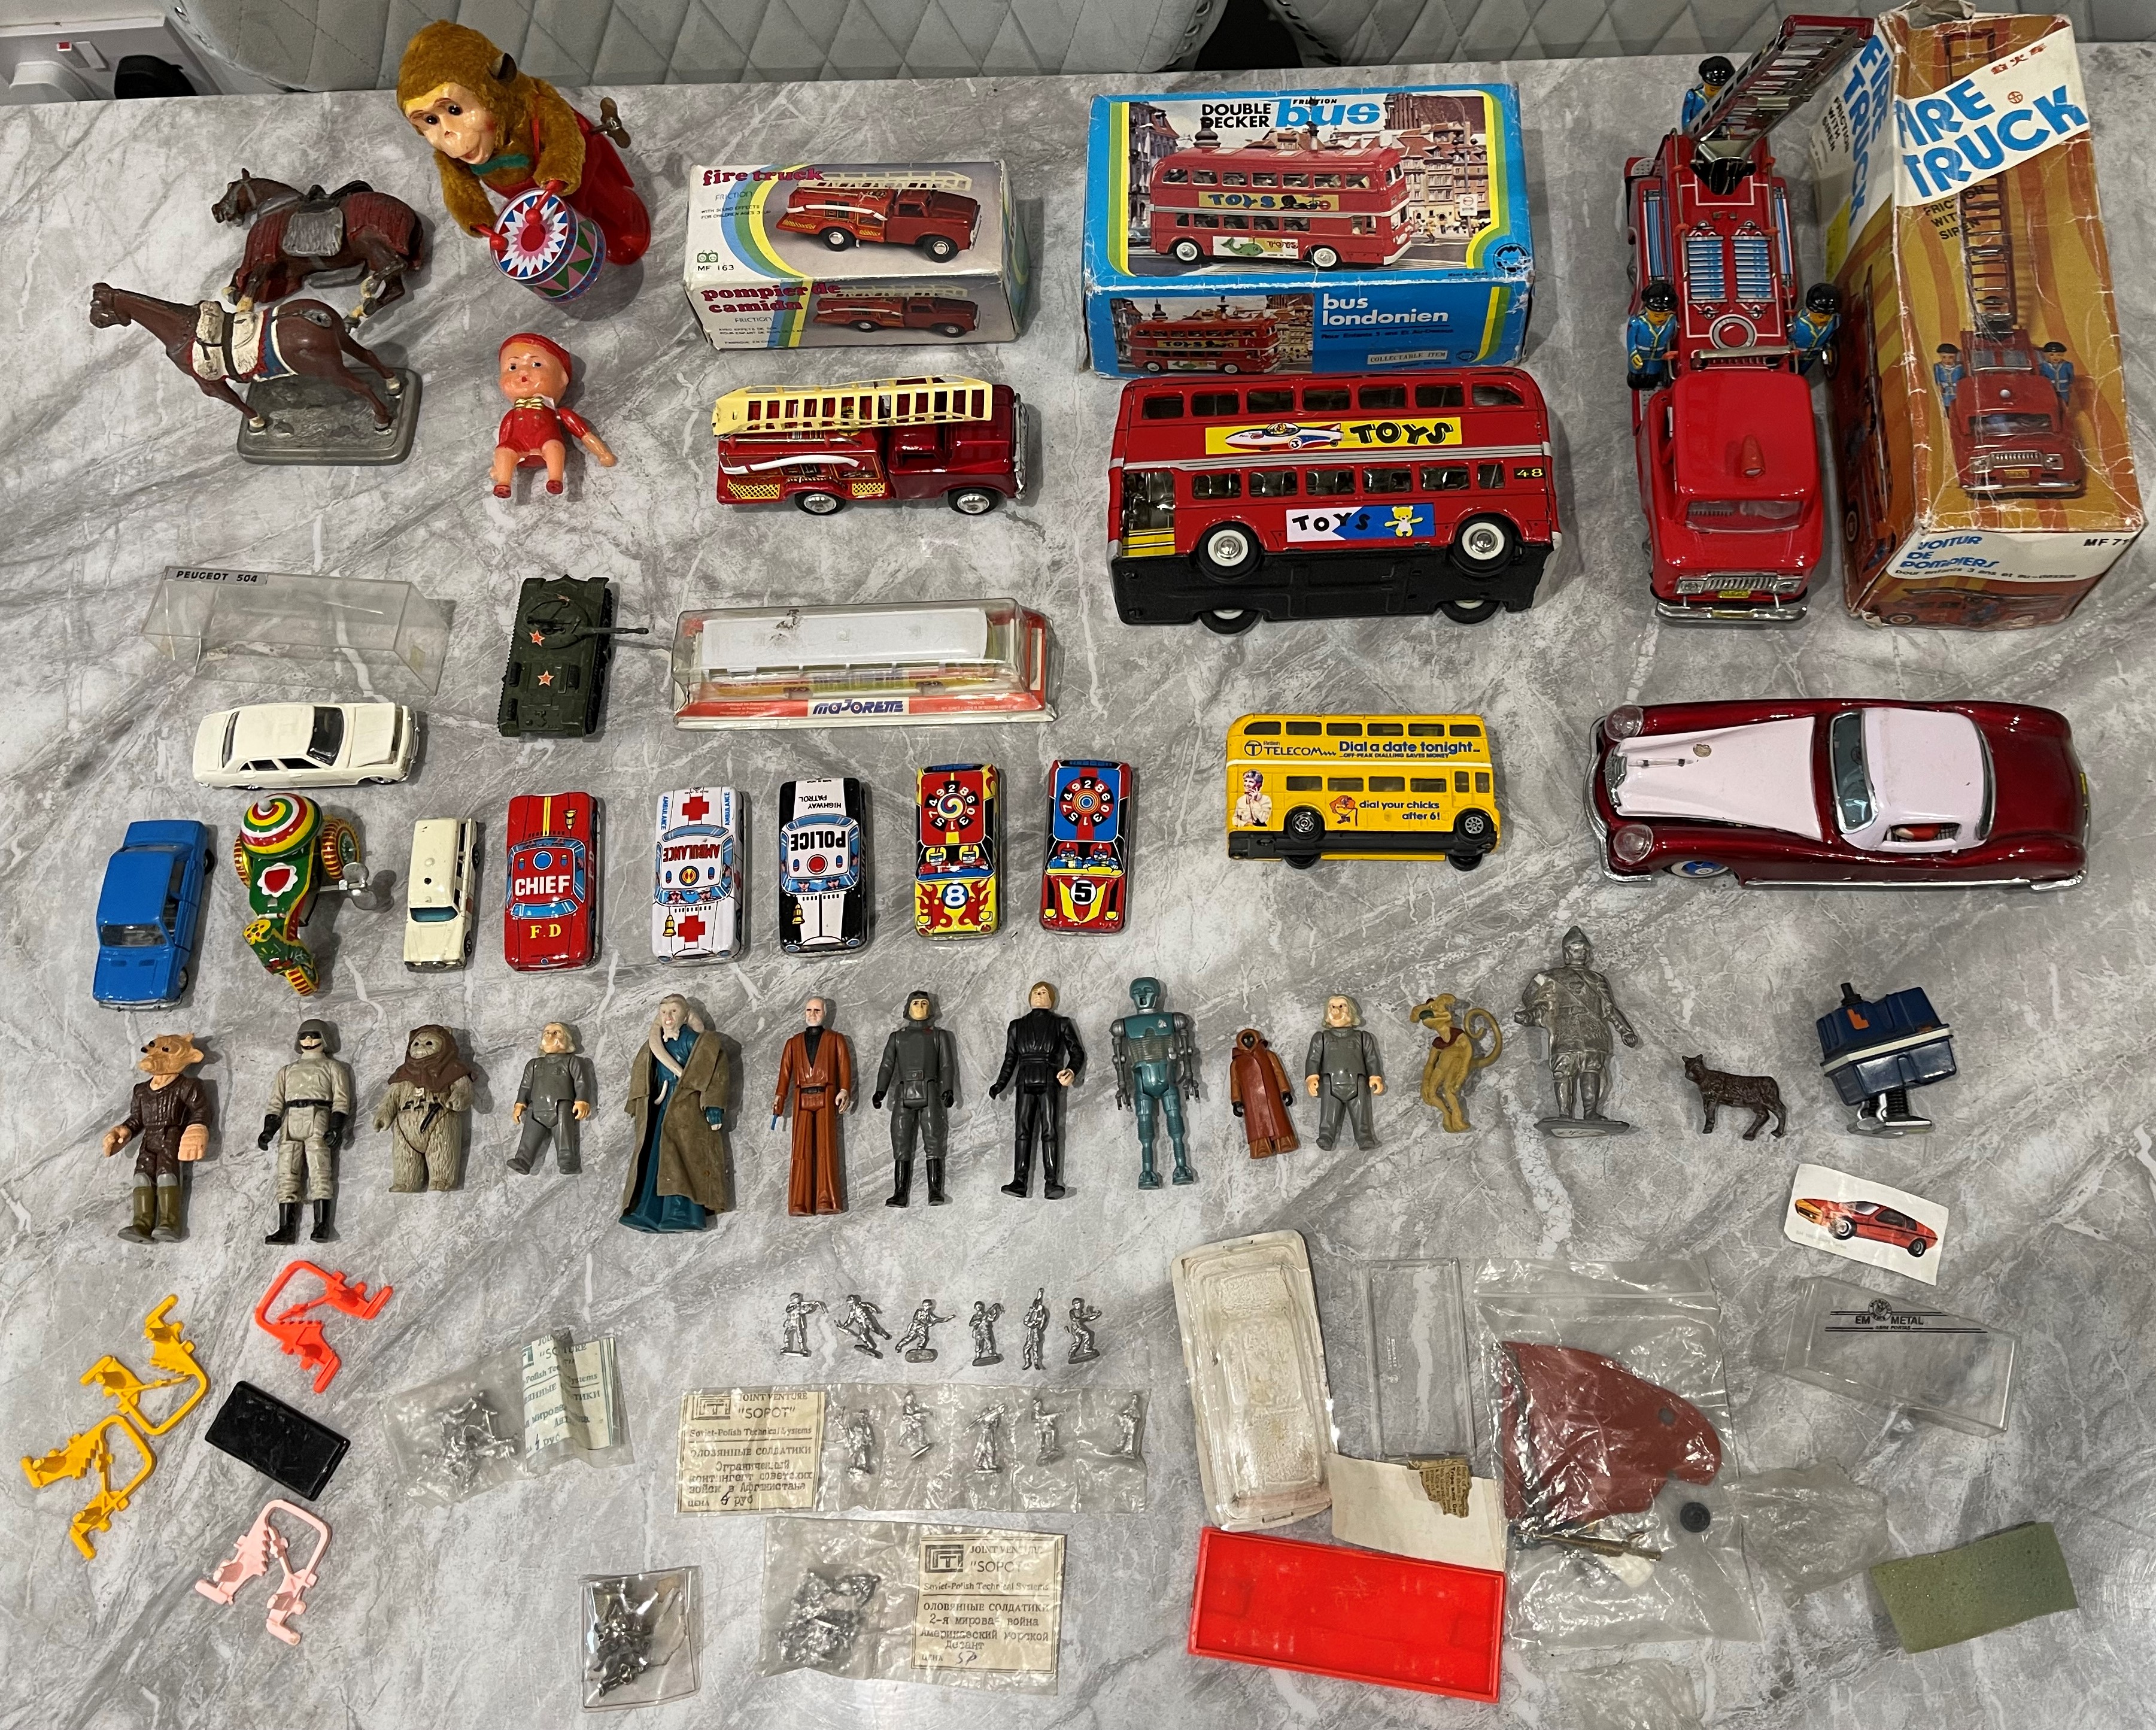 Collection of Vintage Toy Cars and Figures and oth